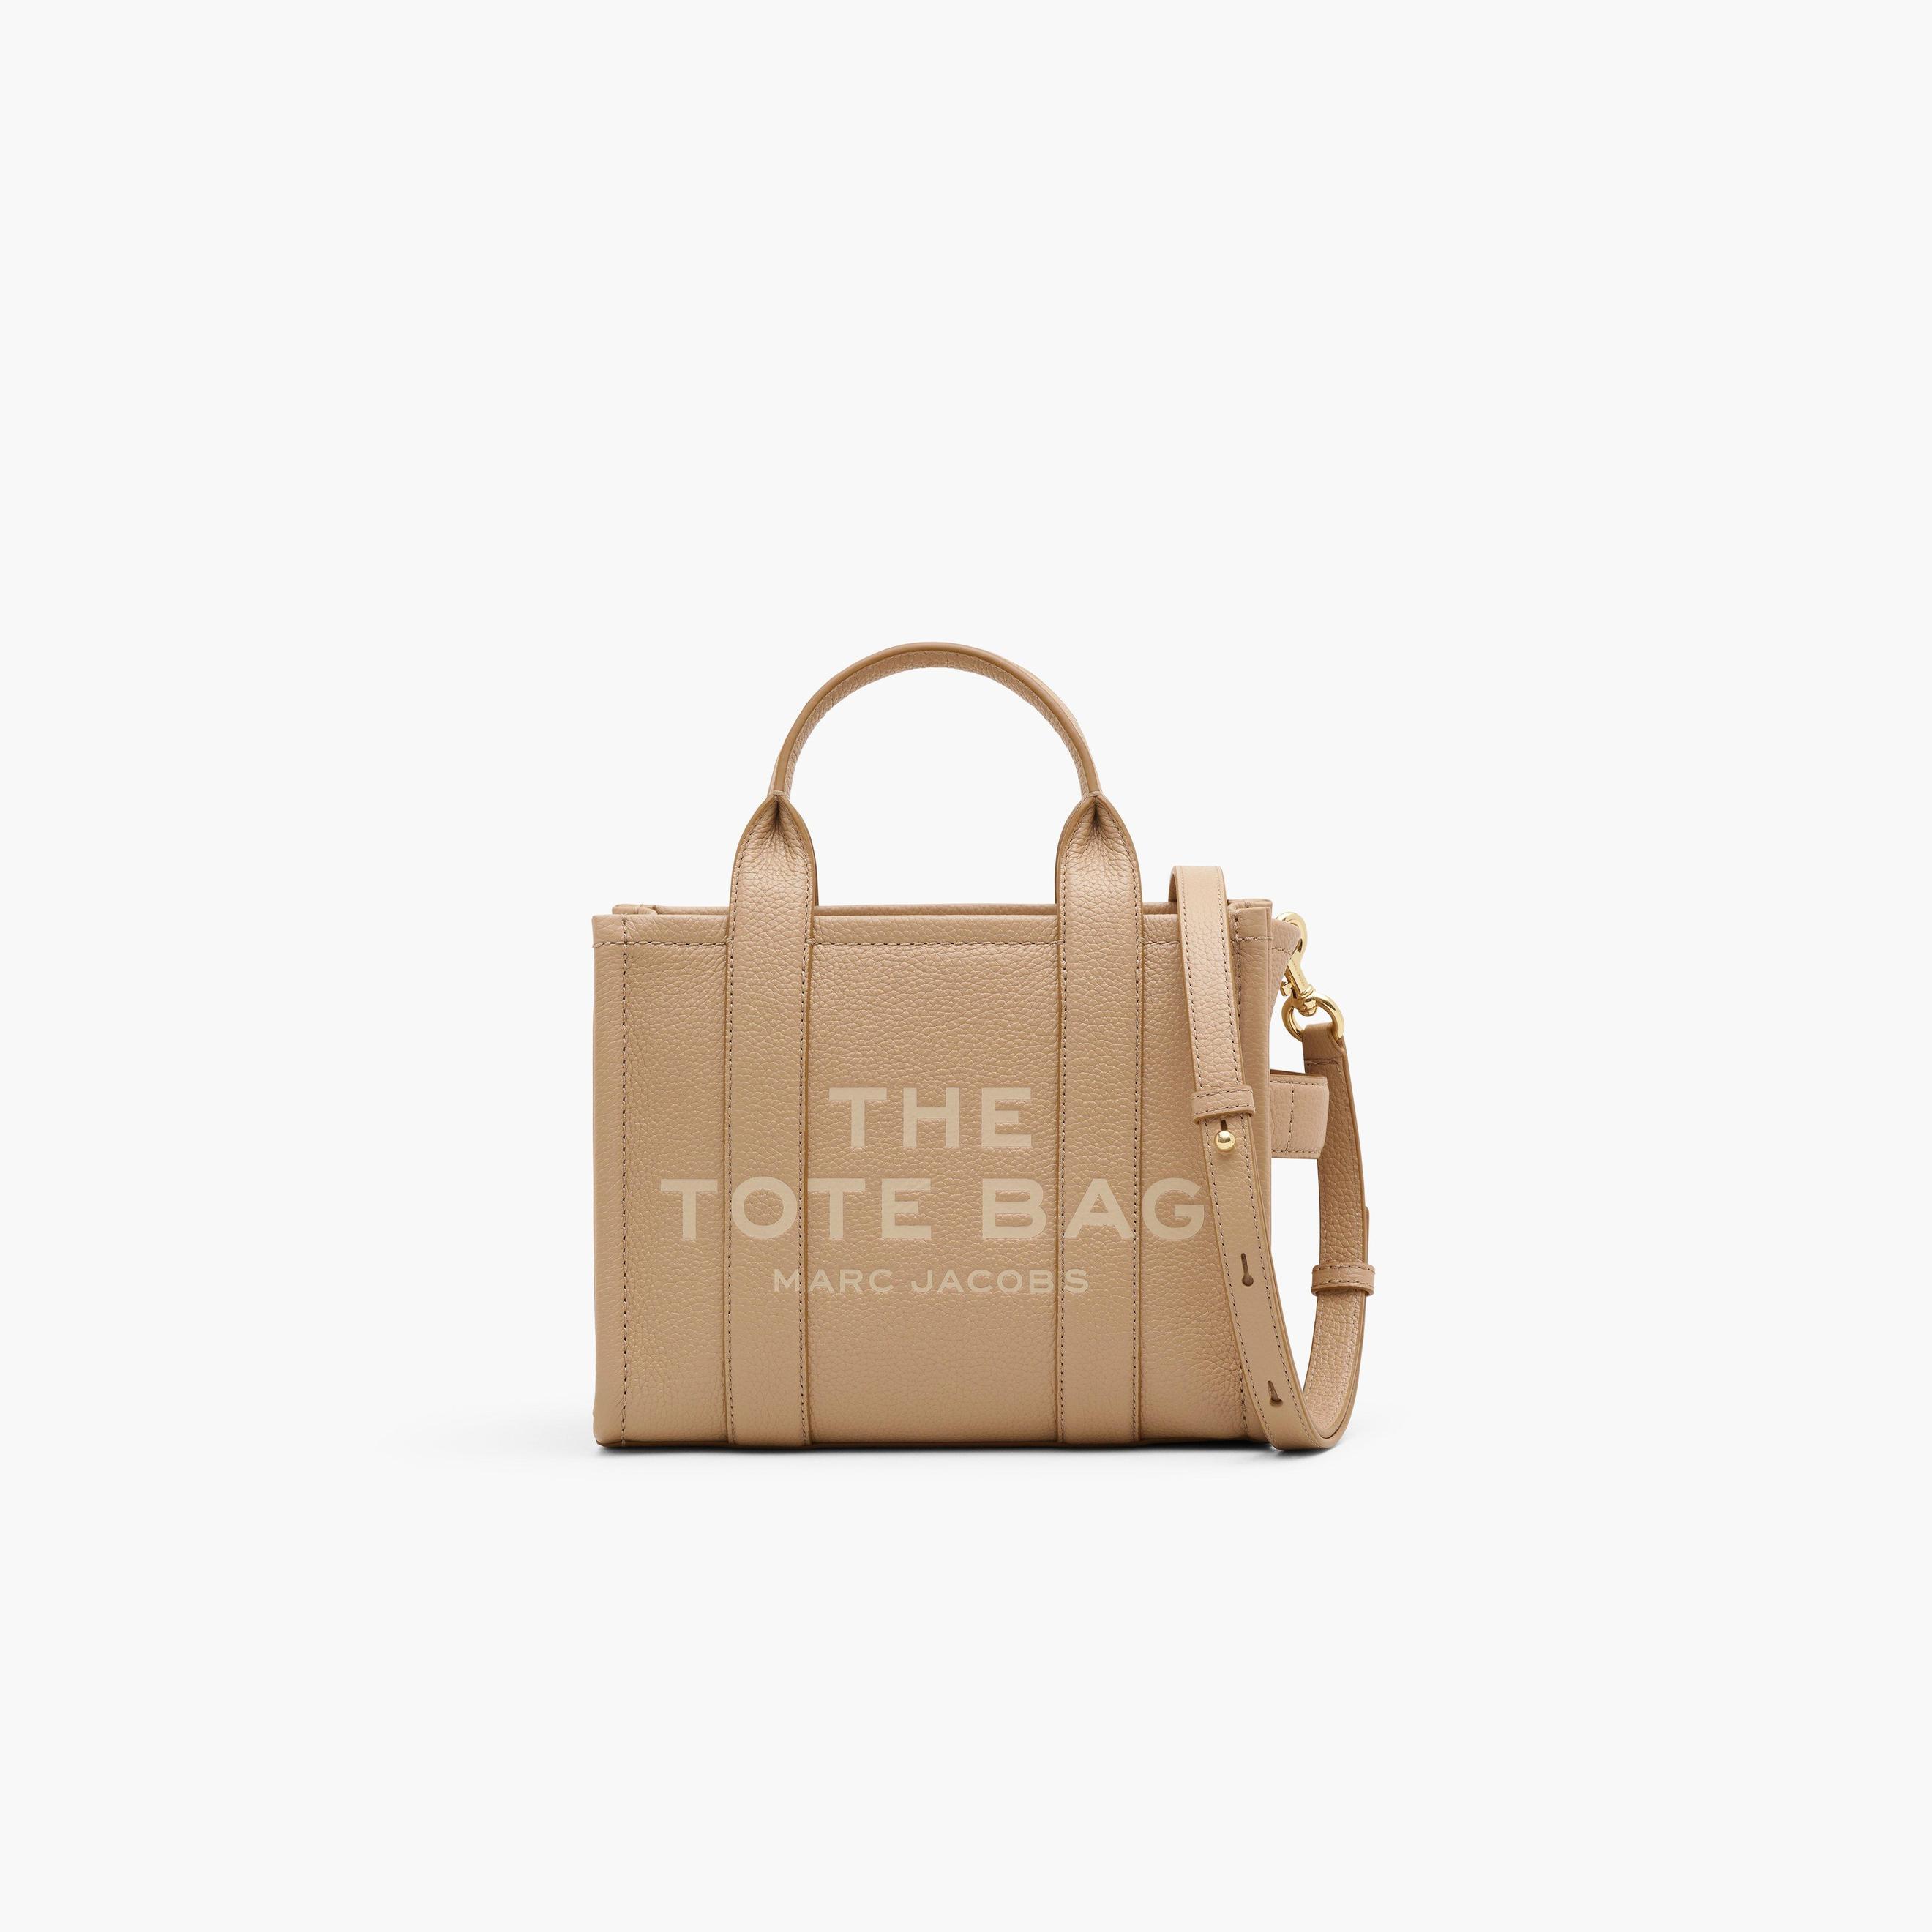 The Leather Small Tote Bag tuote hintaan 475€ liikkeestä Marc Jacobs